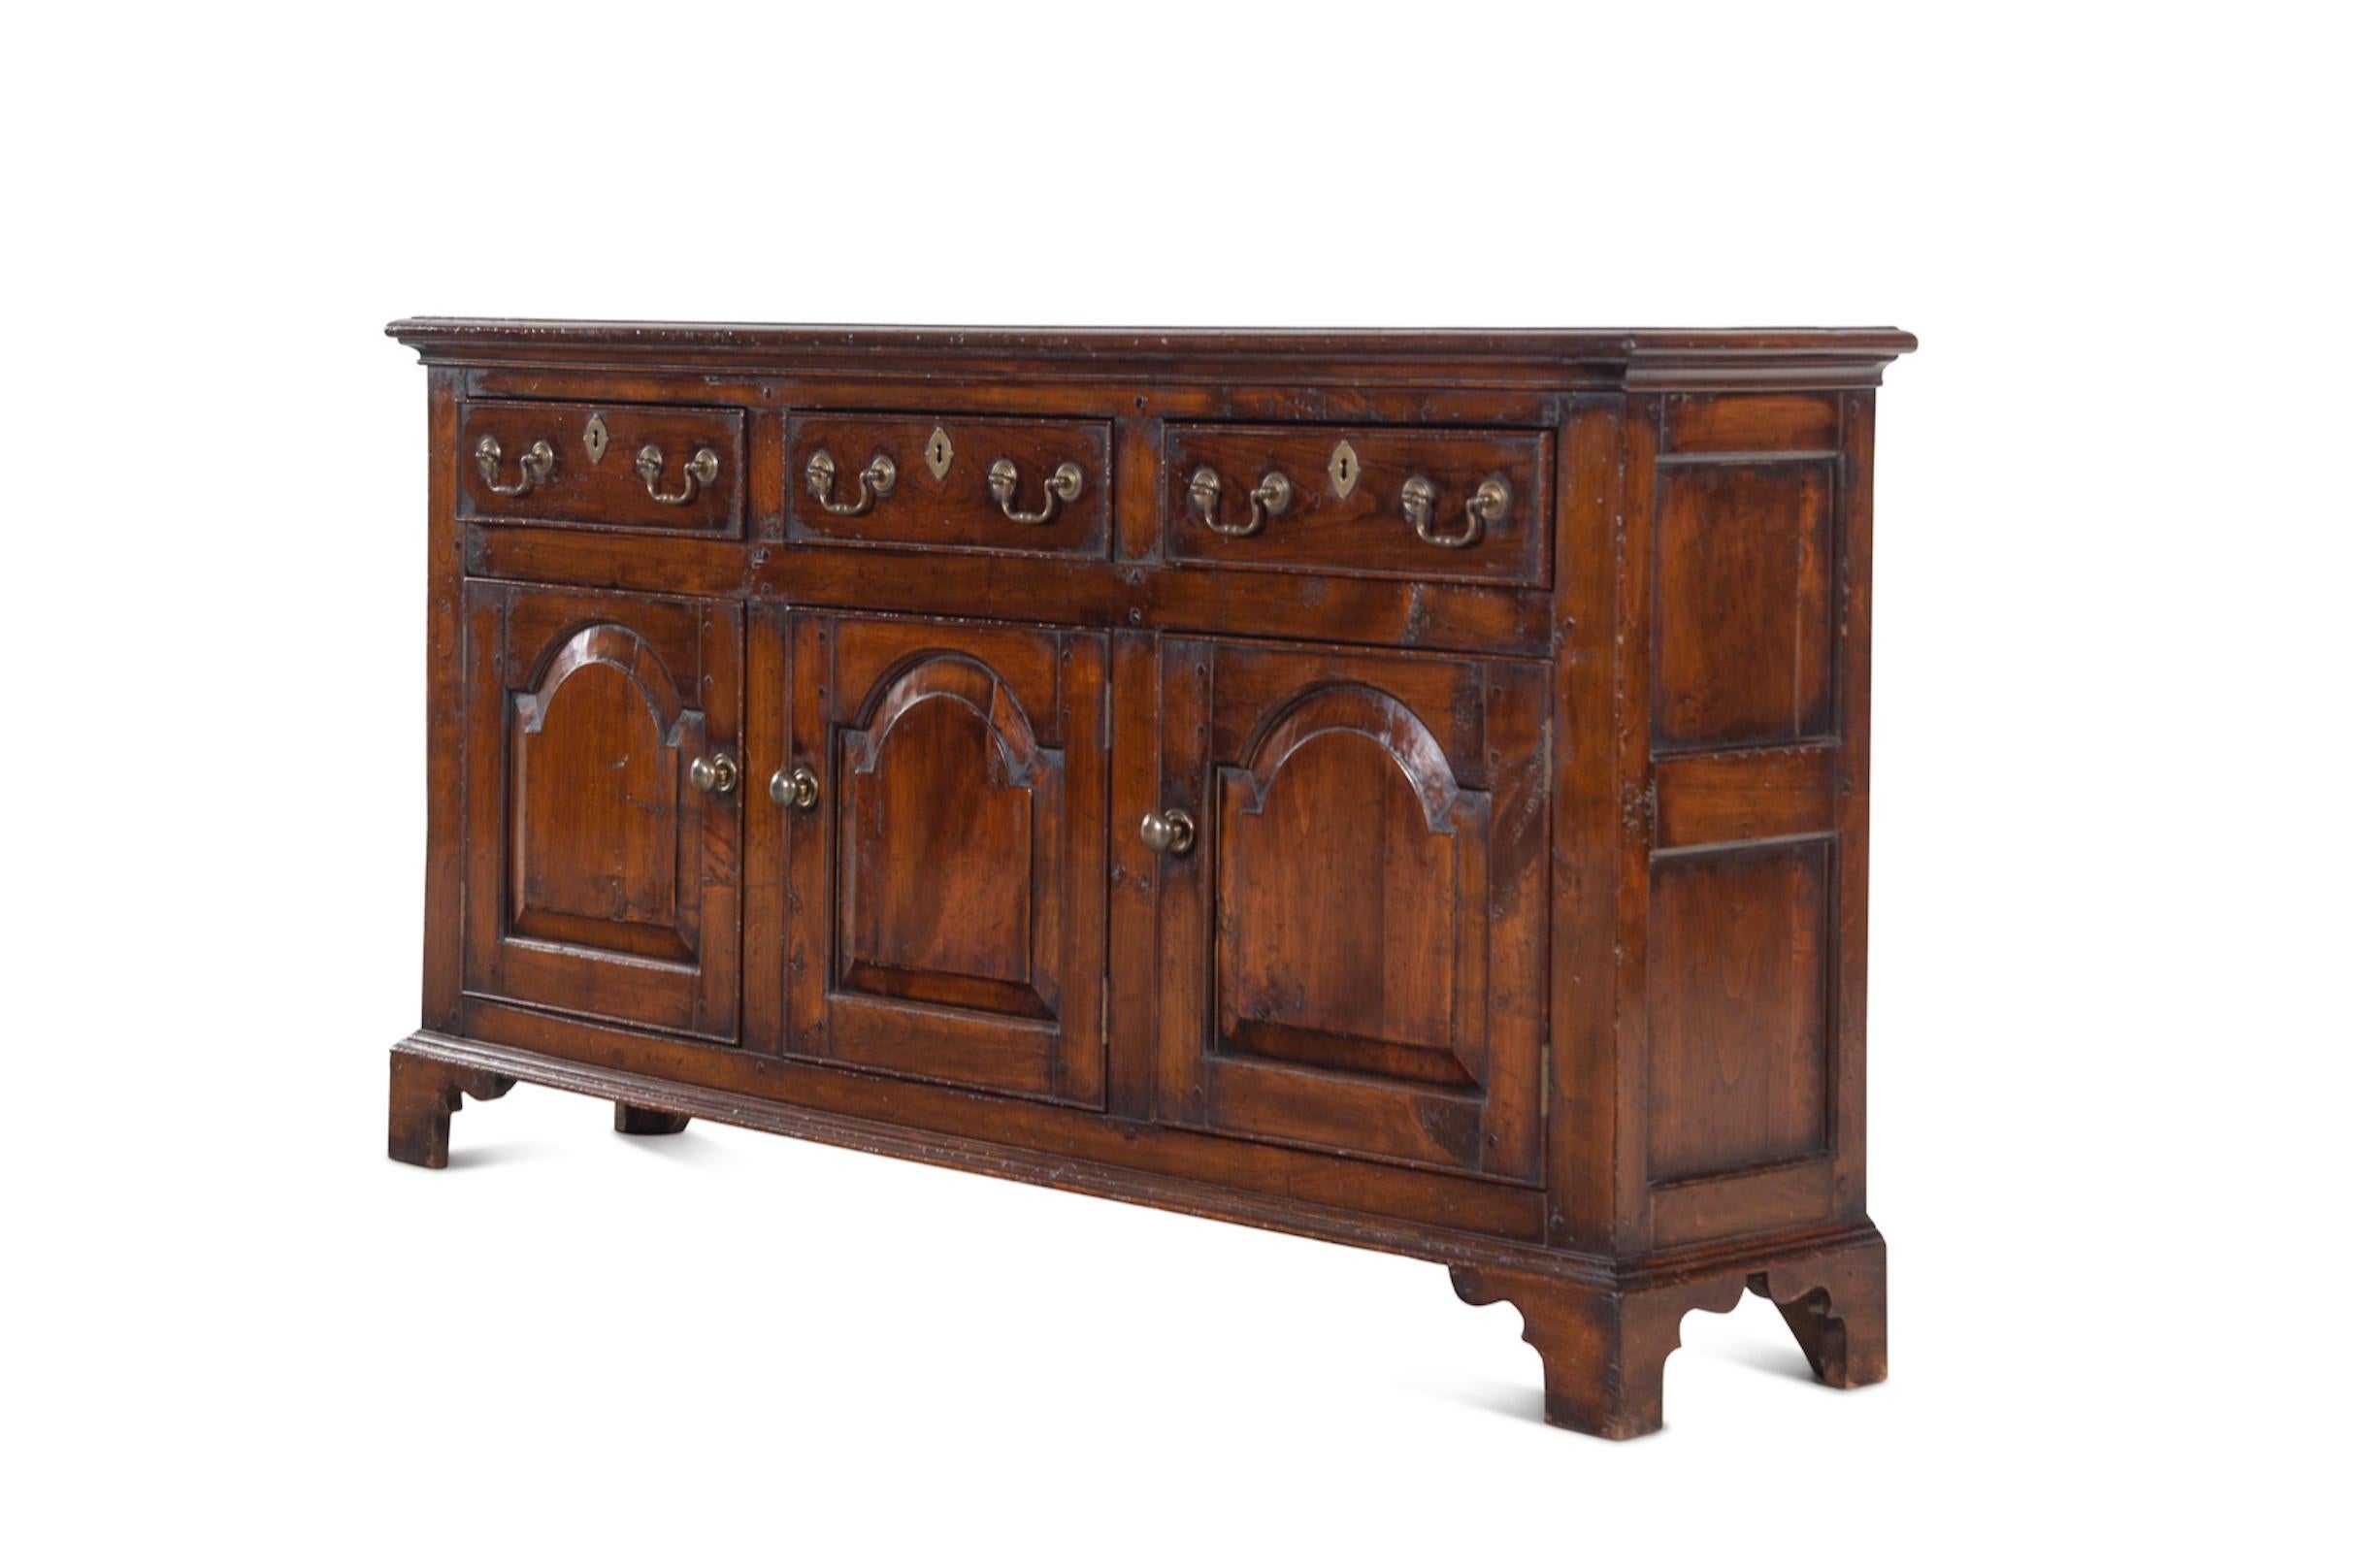 A George III Style Walnut Serving Cabinet
19th Century elements.  Great Scale For Storage, Spectacular Color And Pantination.
Height 31 x width 60 x depth 13 inches.